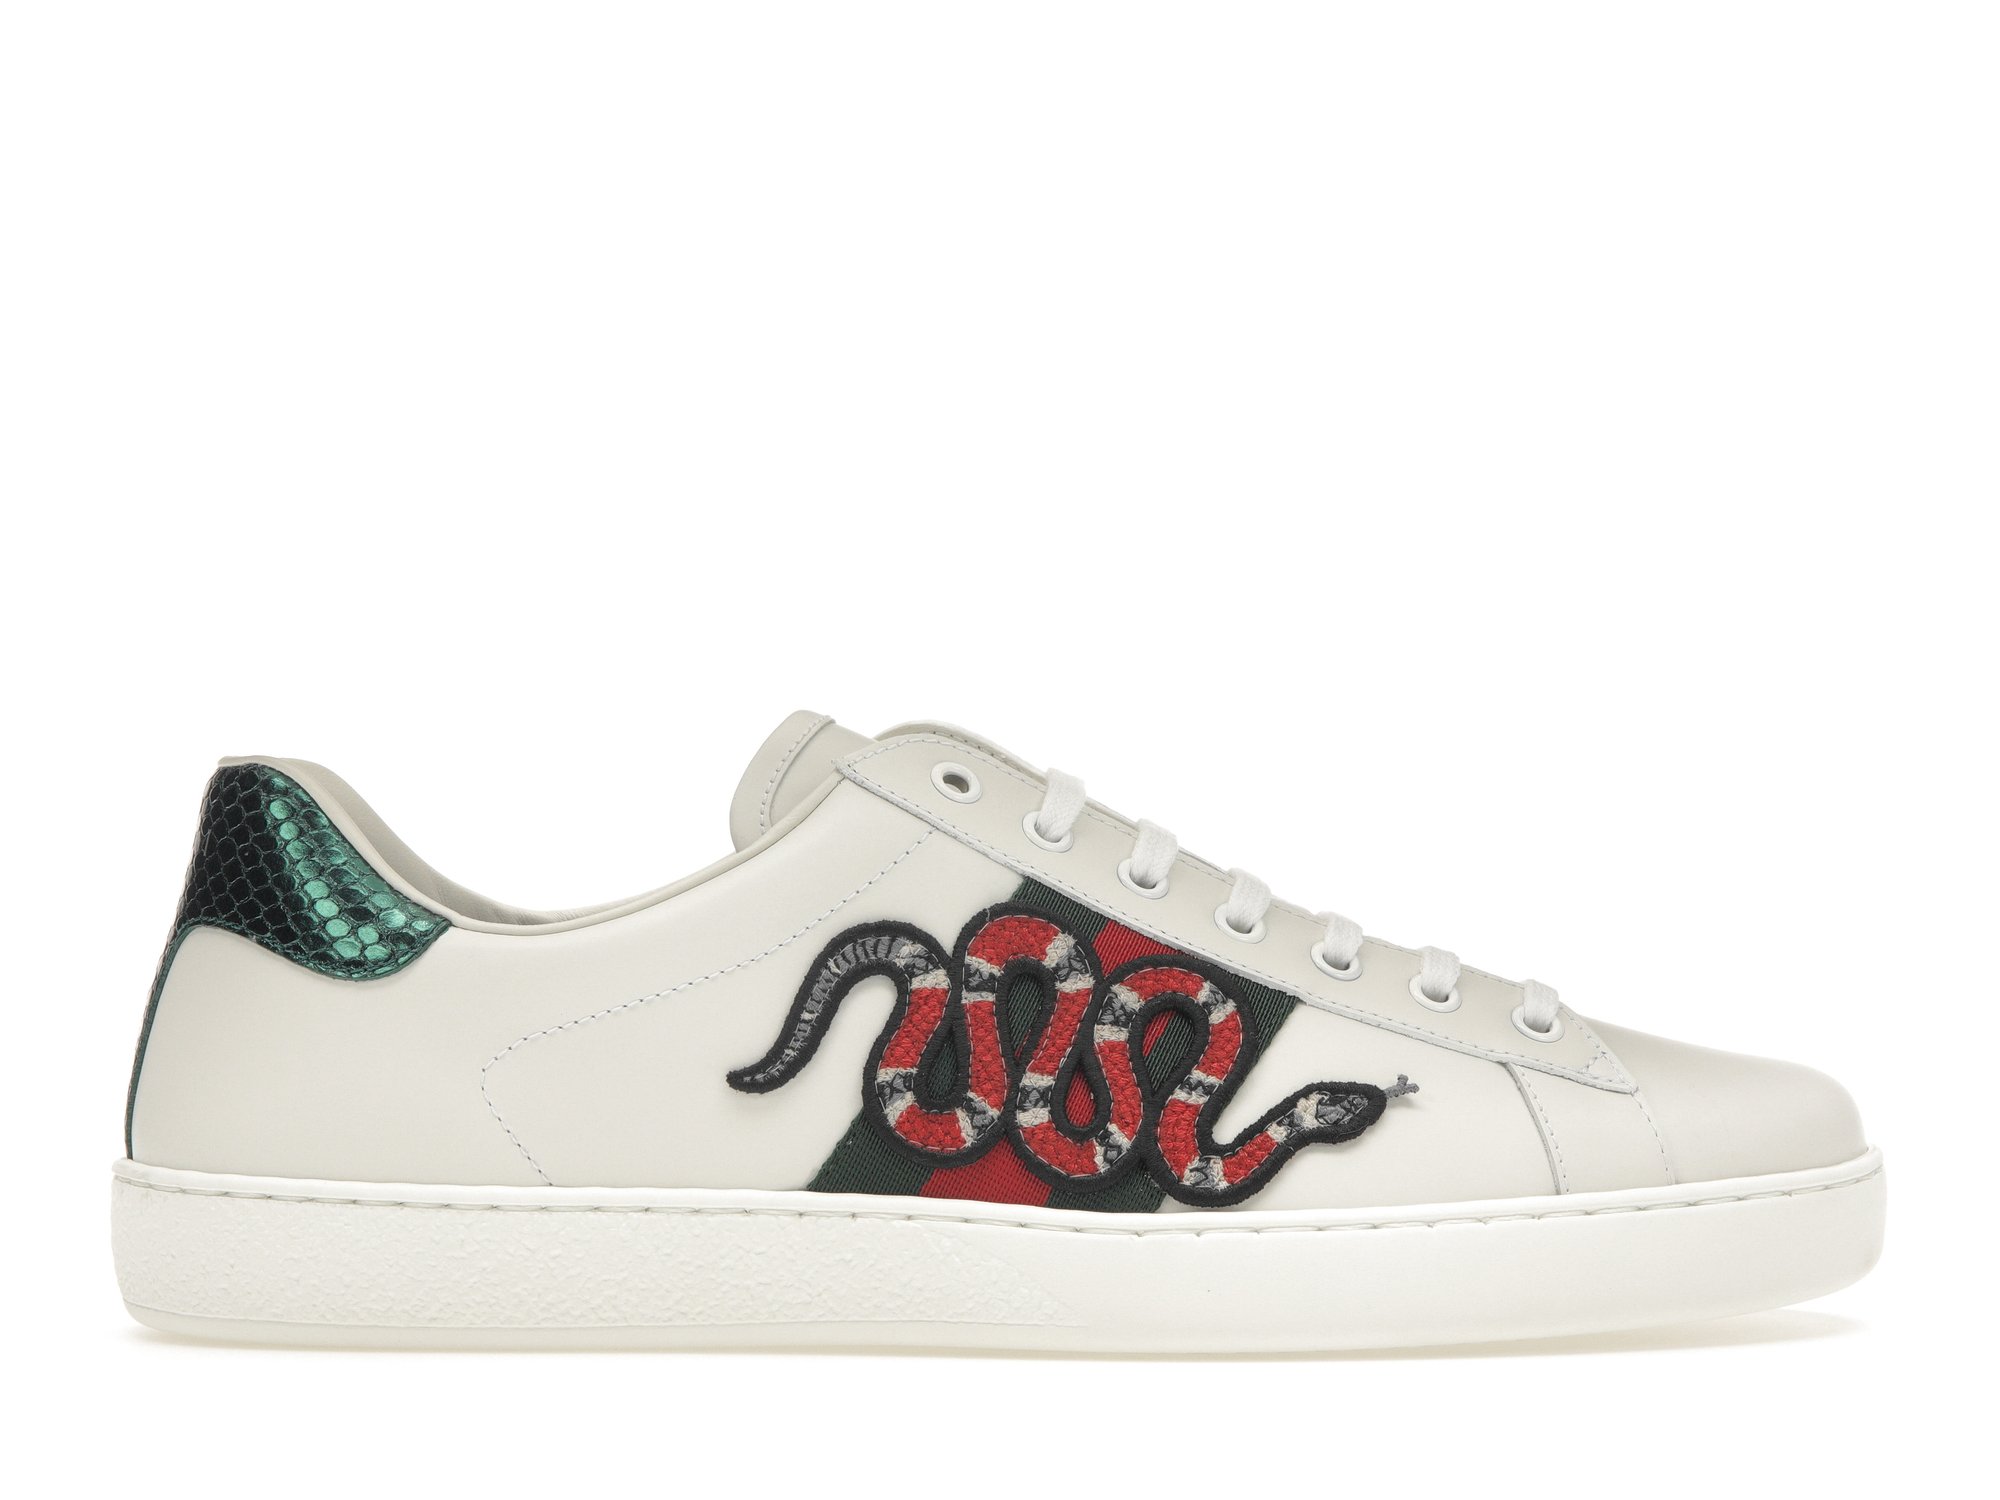 Gucci | Shoes | Gucci Ace Sneakers Womens Size 36 | Poshmark